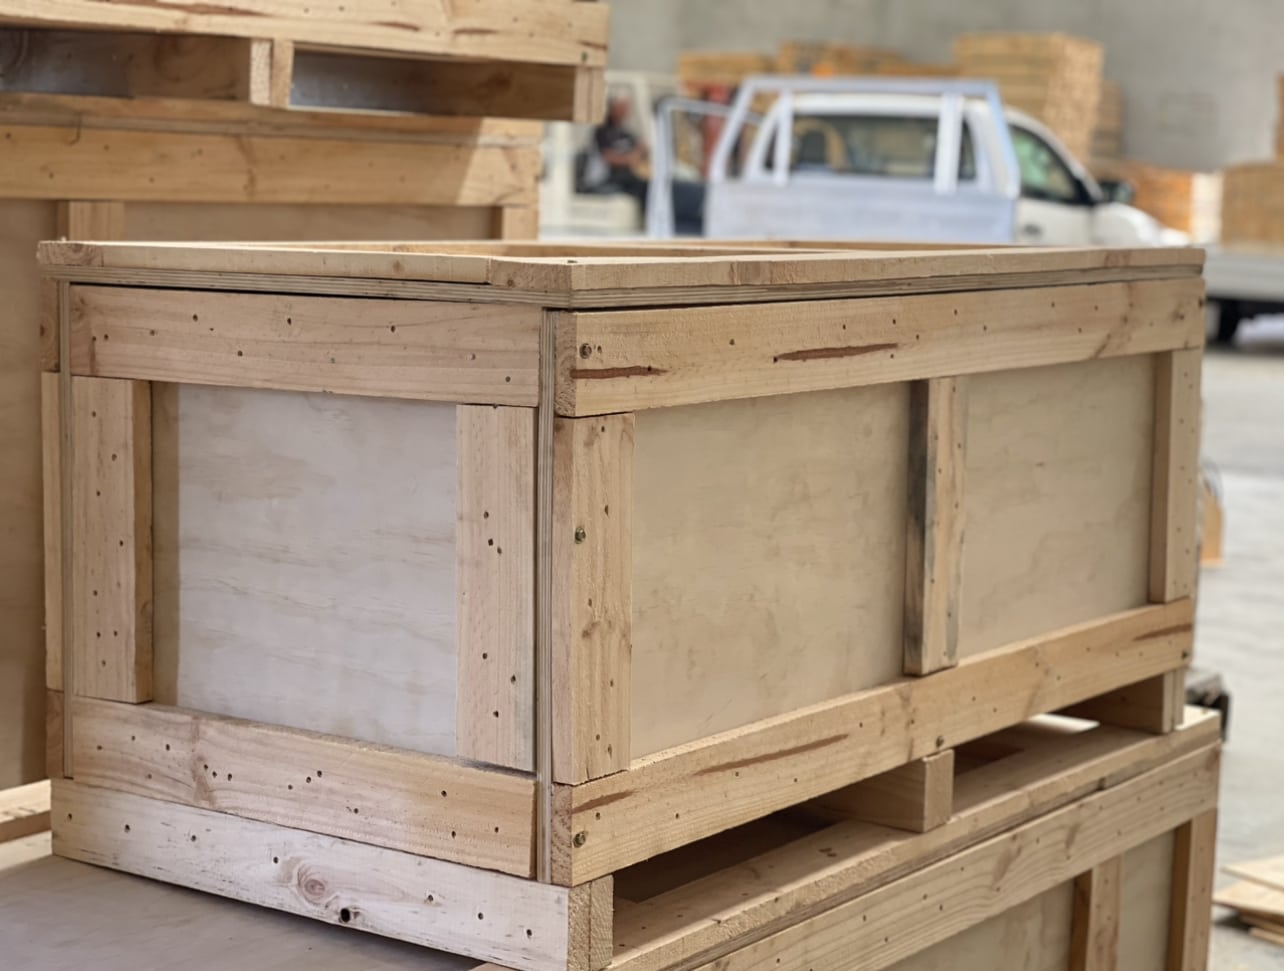 plywood boxes on truck with crate n pack solutions logo in background